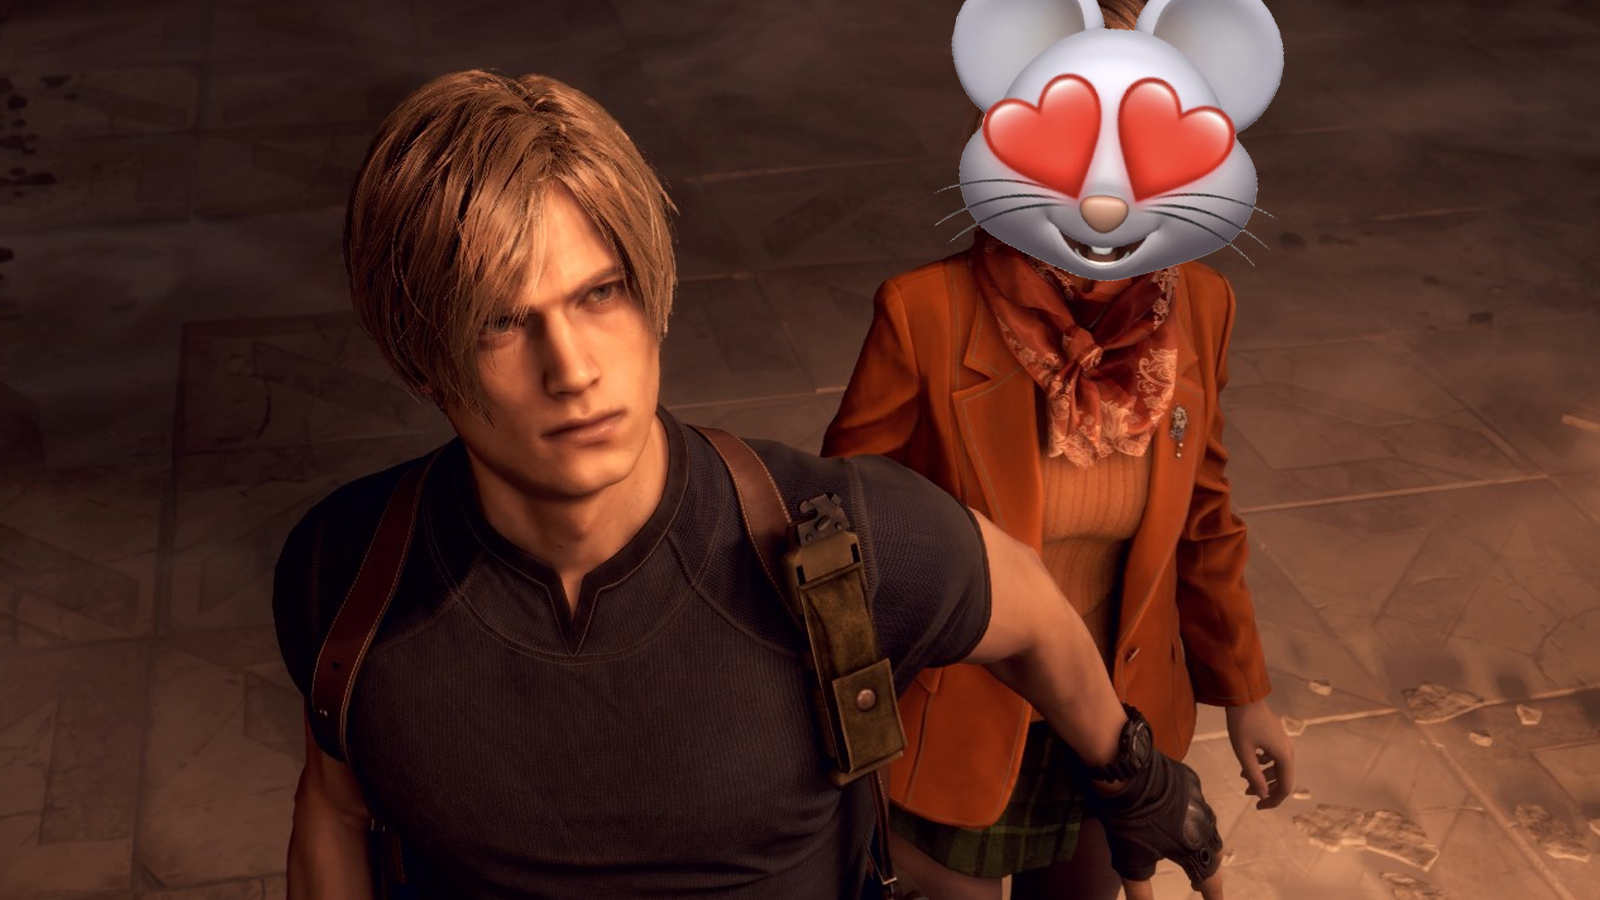 Resident Evil 4 fans won’t stop turning Ashley into a mouse